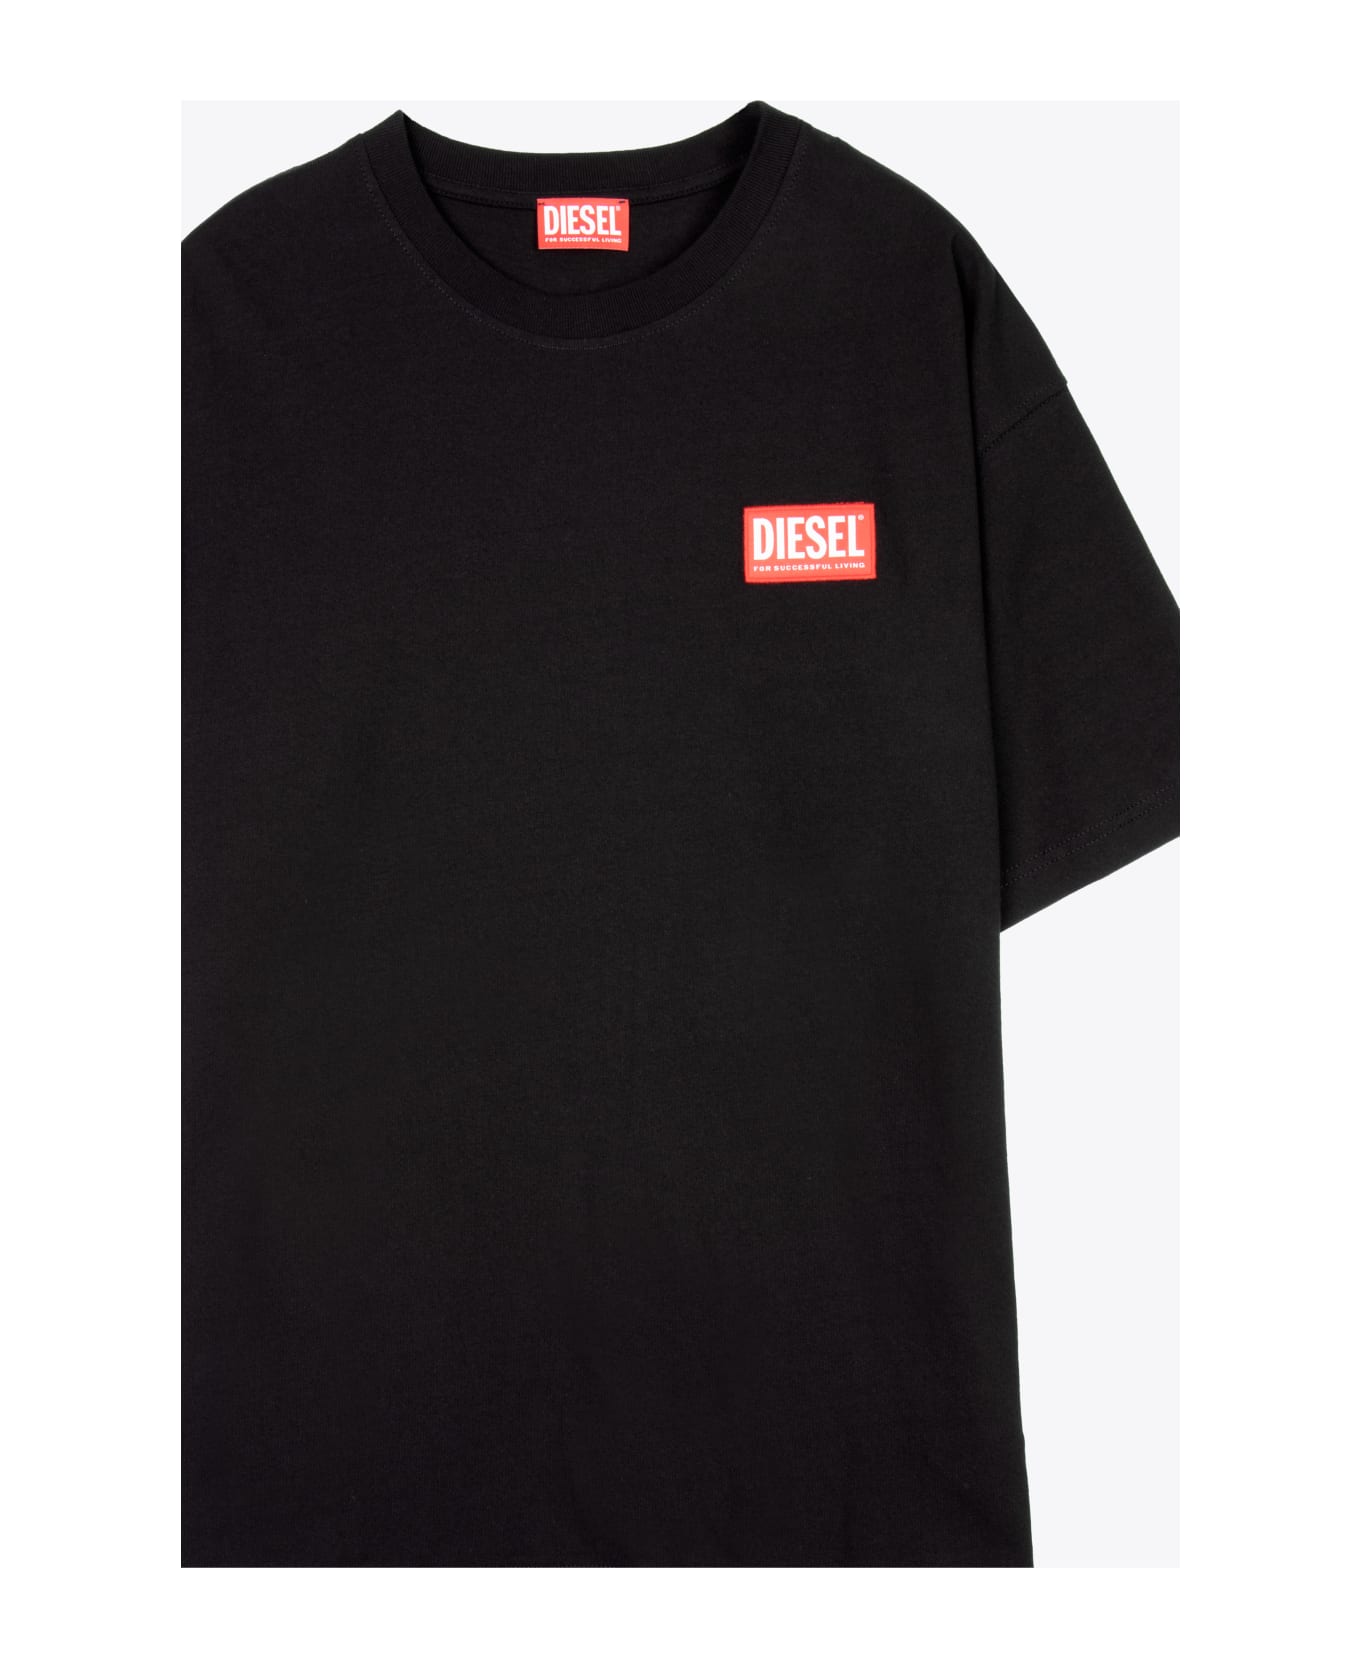 Diesel T-nlabel-l1 Black t-shirt with chest logo patch - T Danny Nlabel - Nero